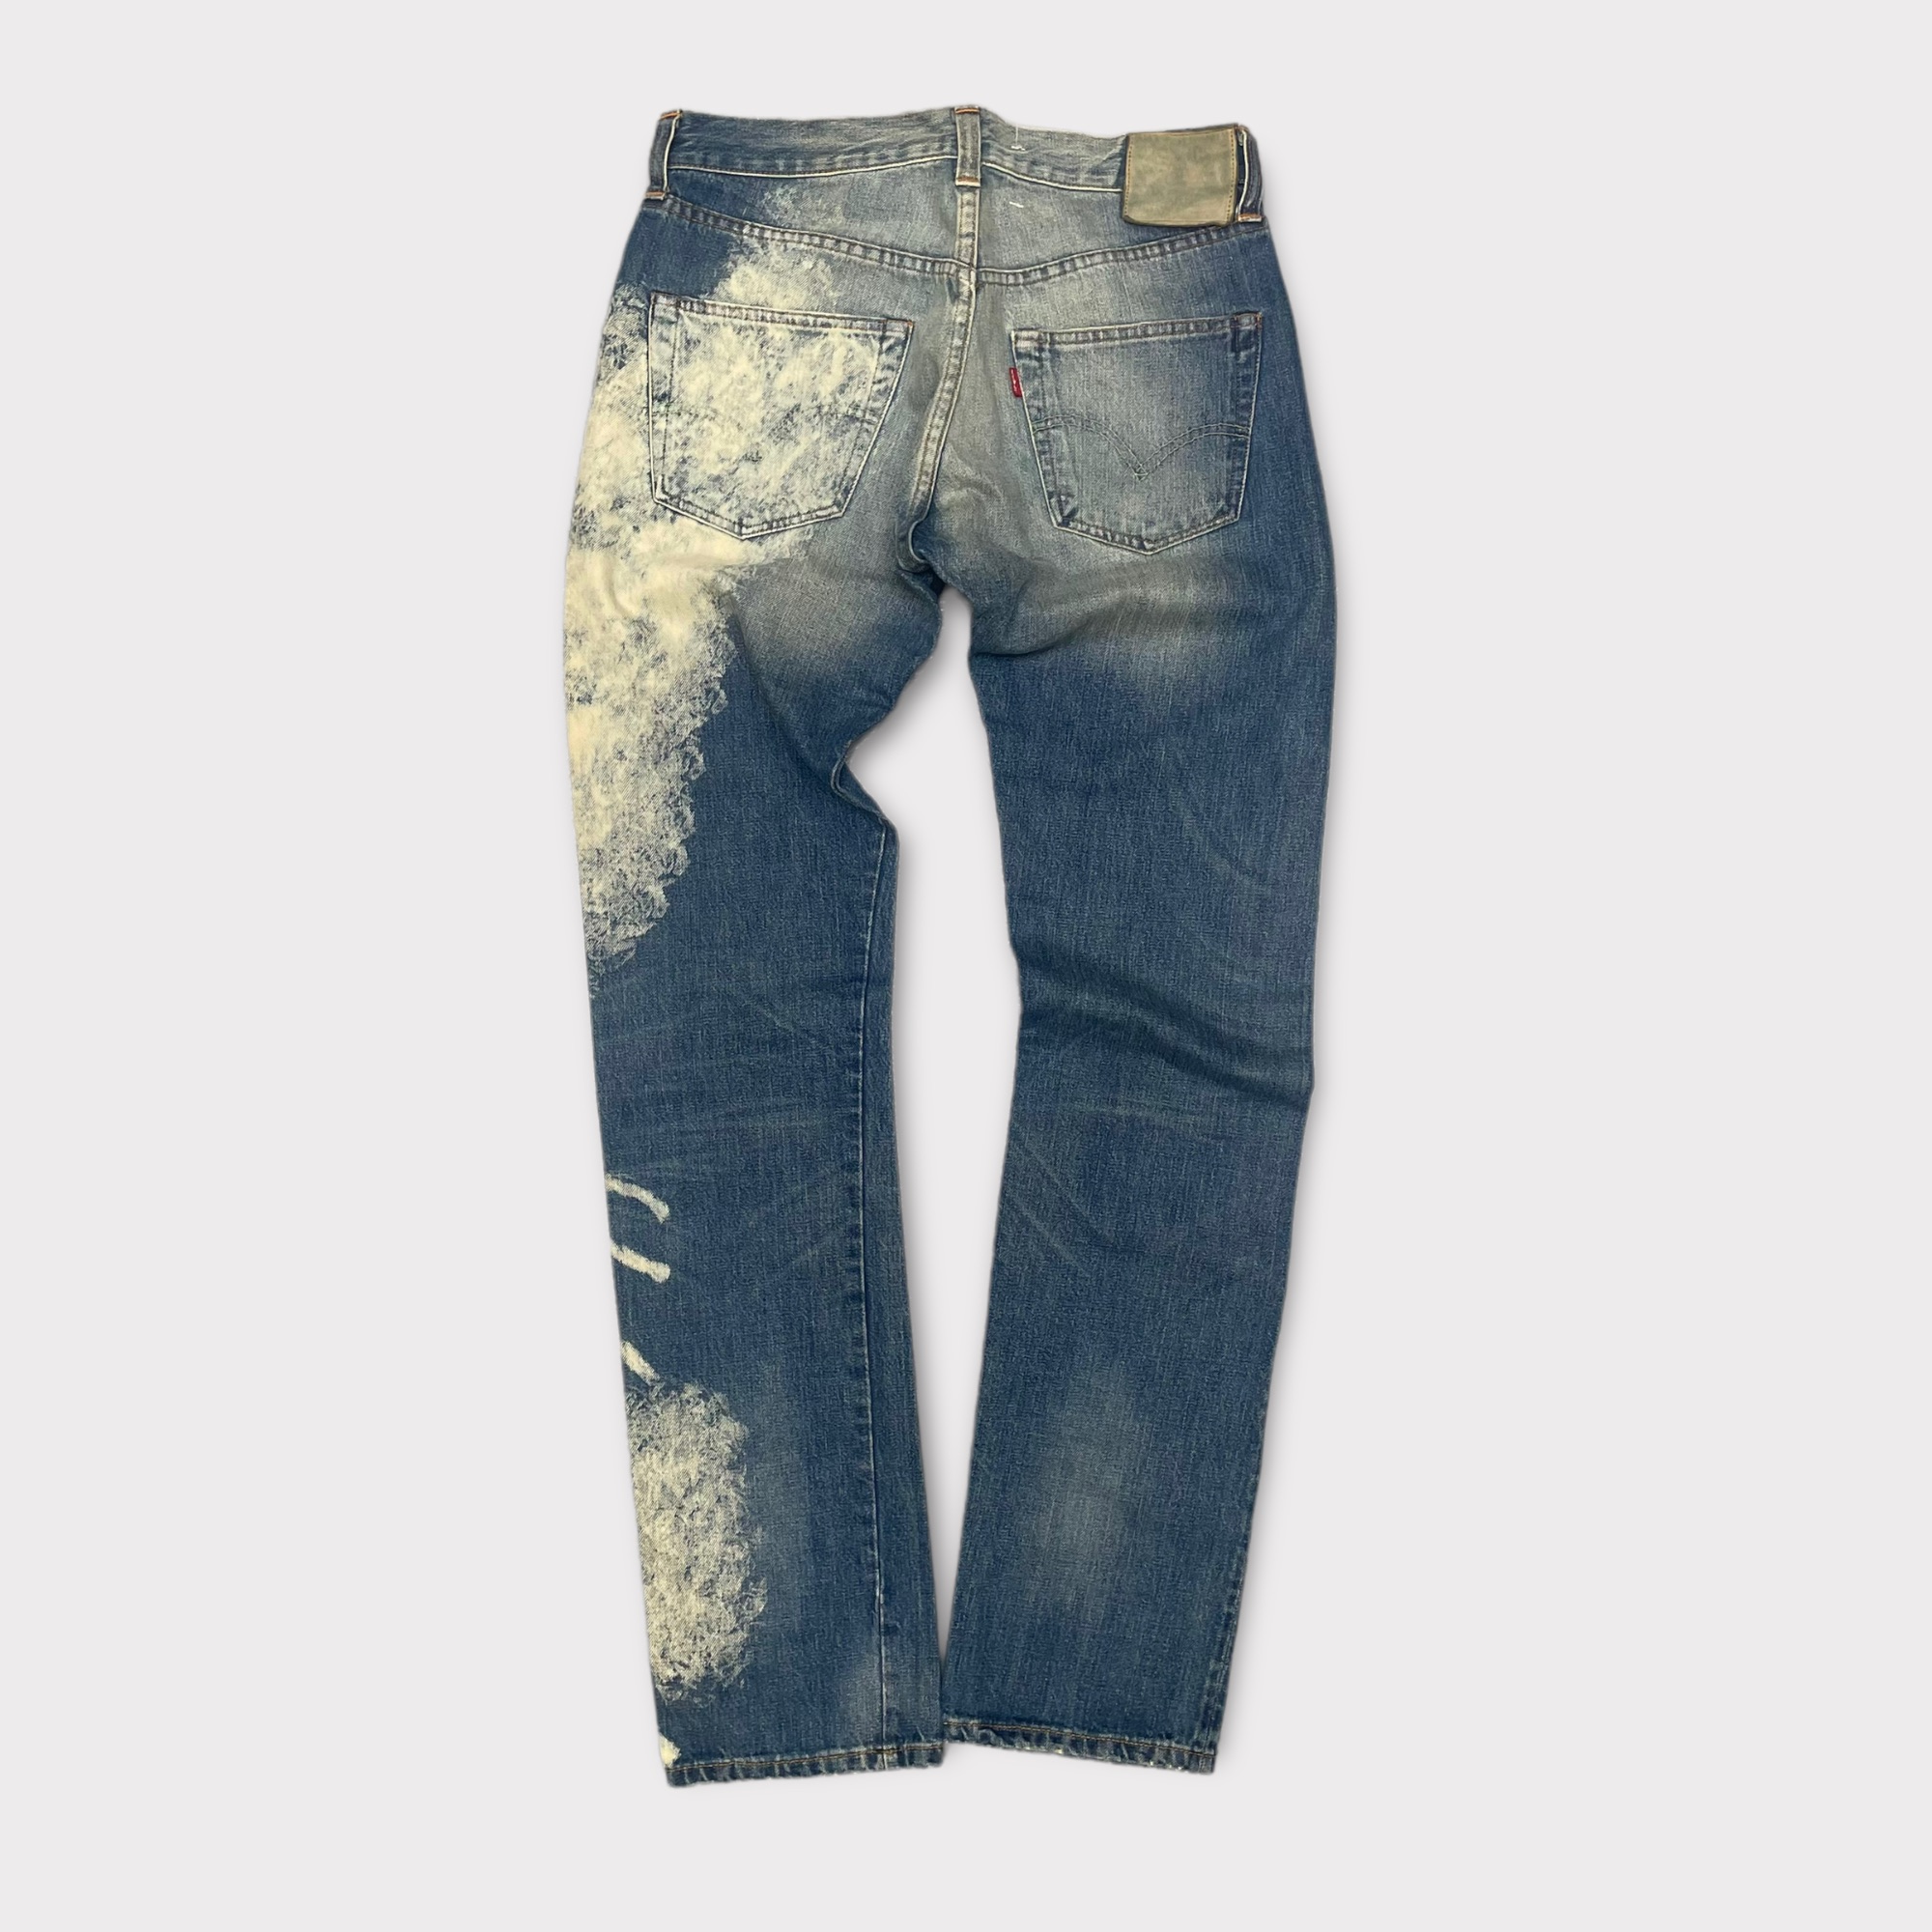 big E levi’s jeans vintage stained